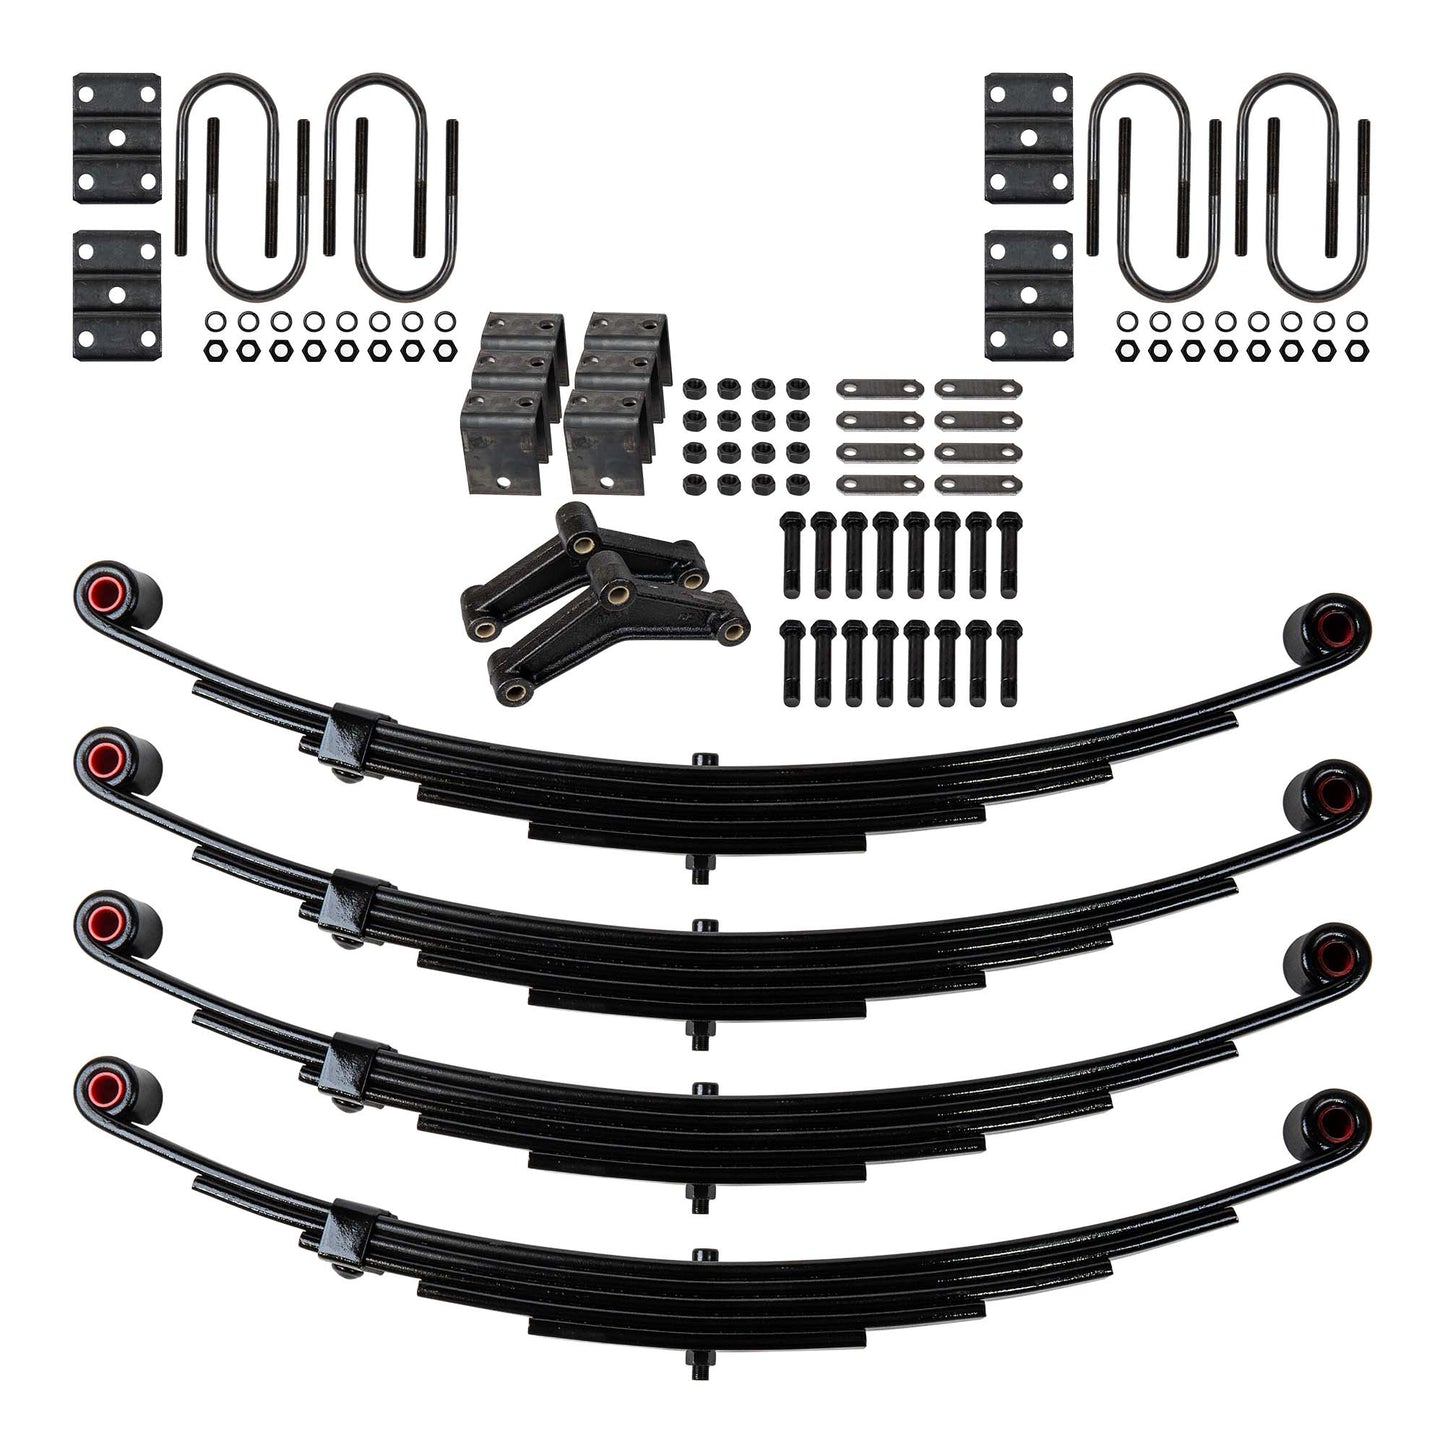 Trailer 5 Leaf Double Eye Spring Suspension and Tandem Axle Hanger Kit for 3" Tubes - 6000 lb Axles